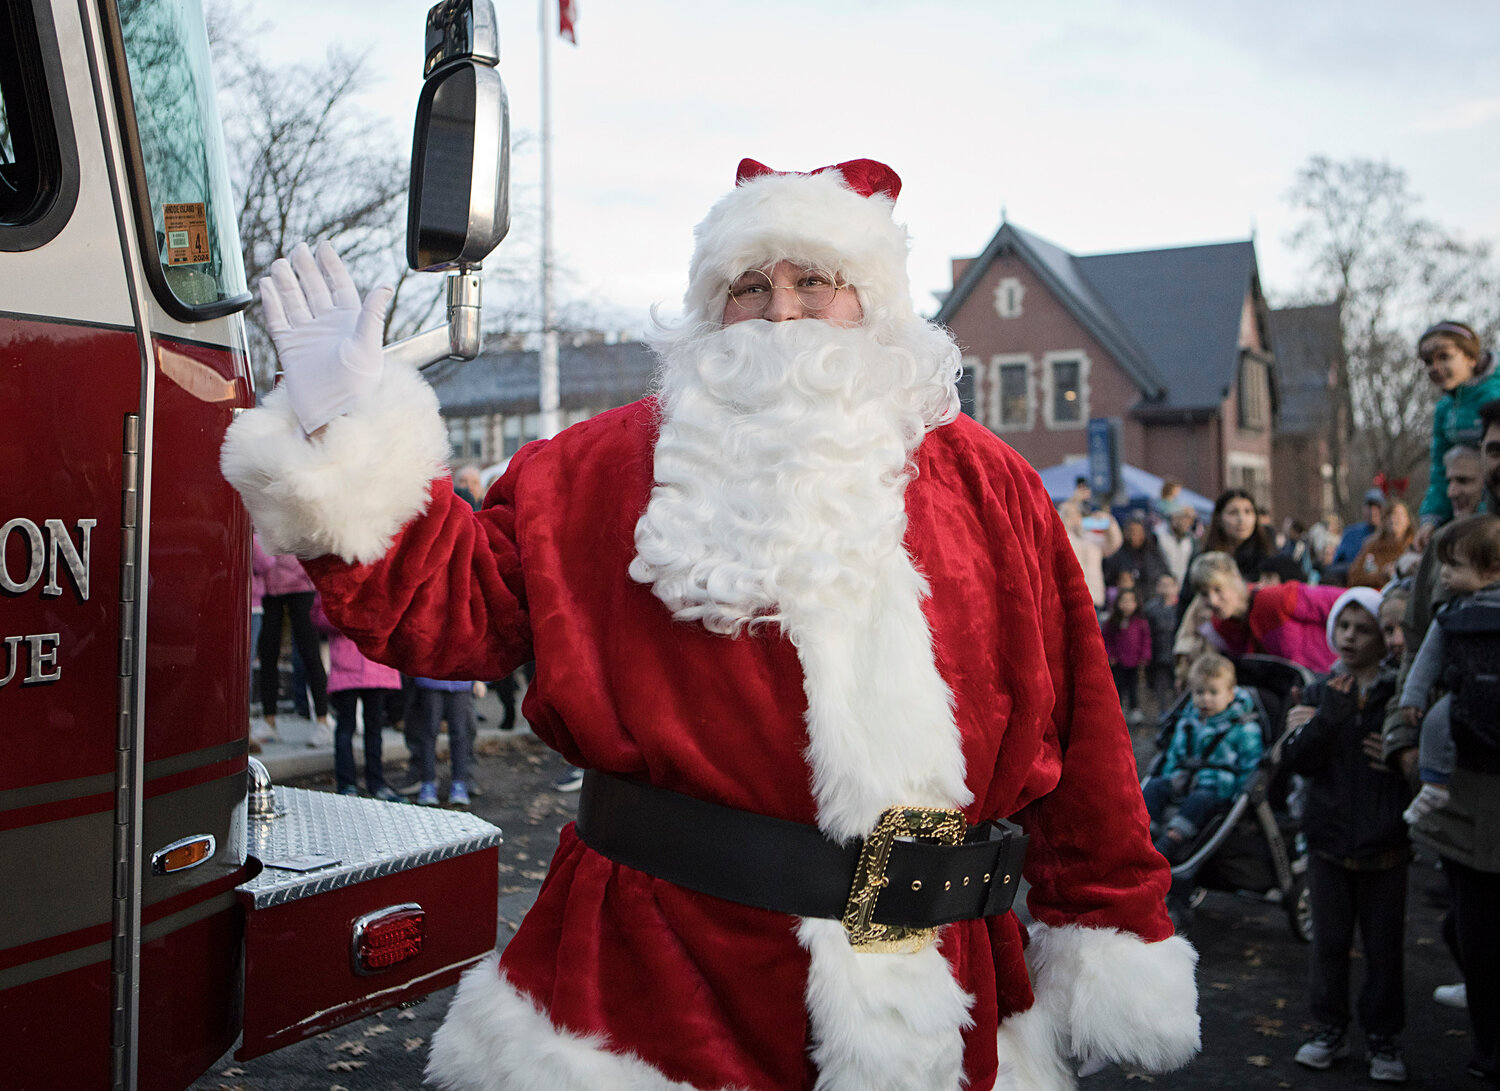 Santa waves to the crowd as he climbs out of a fire truck at the tree-lighting event in town on Saturday, Dec. 2.